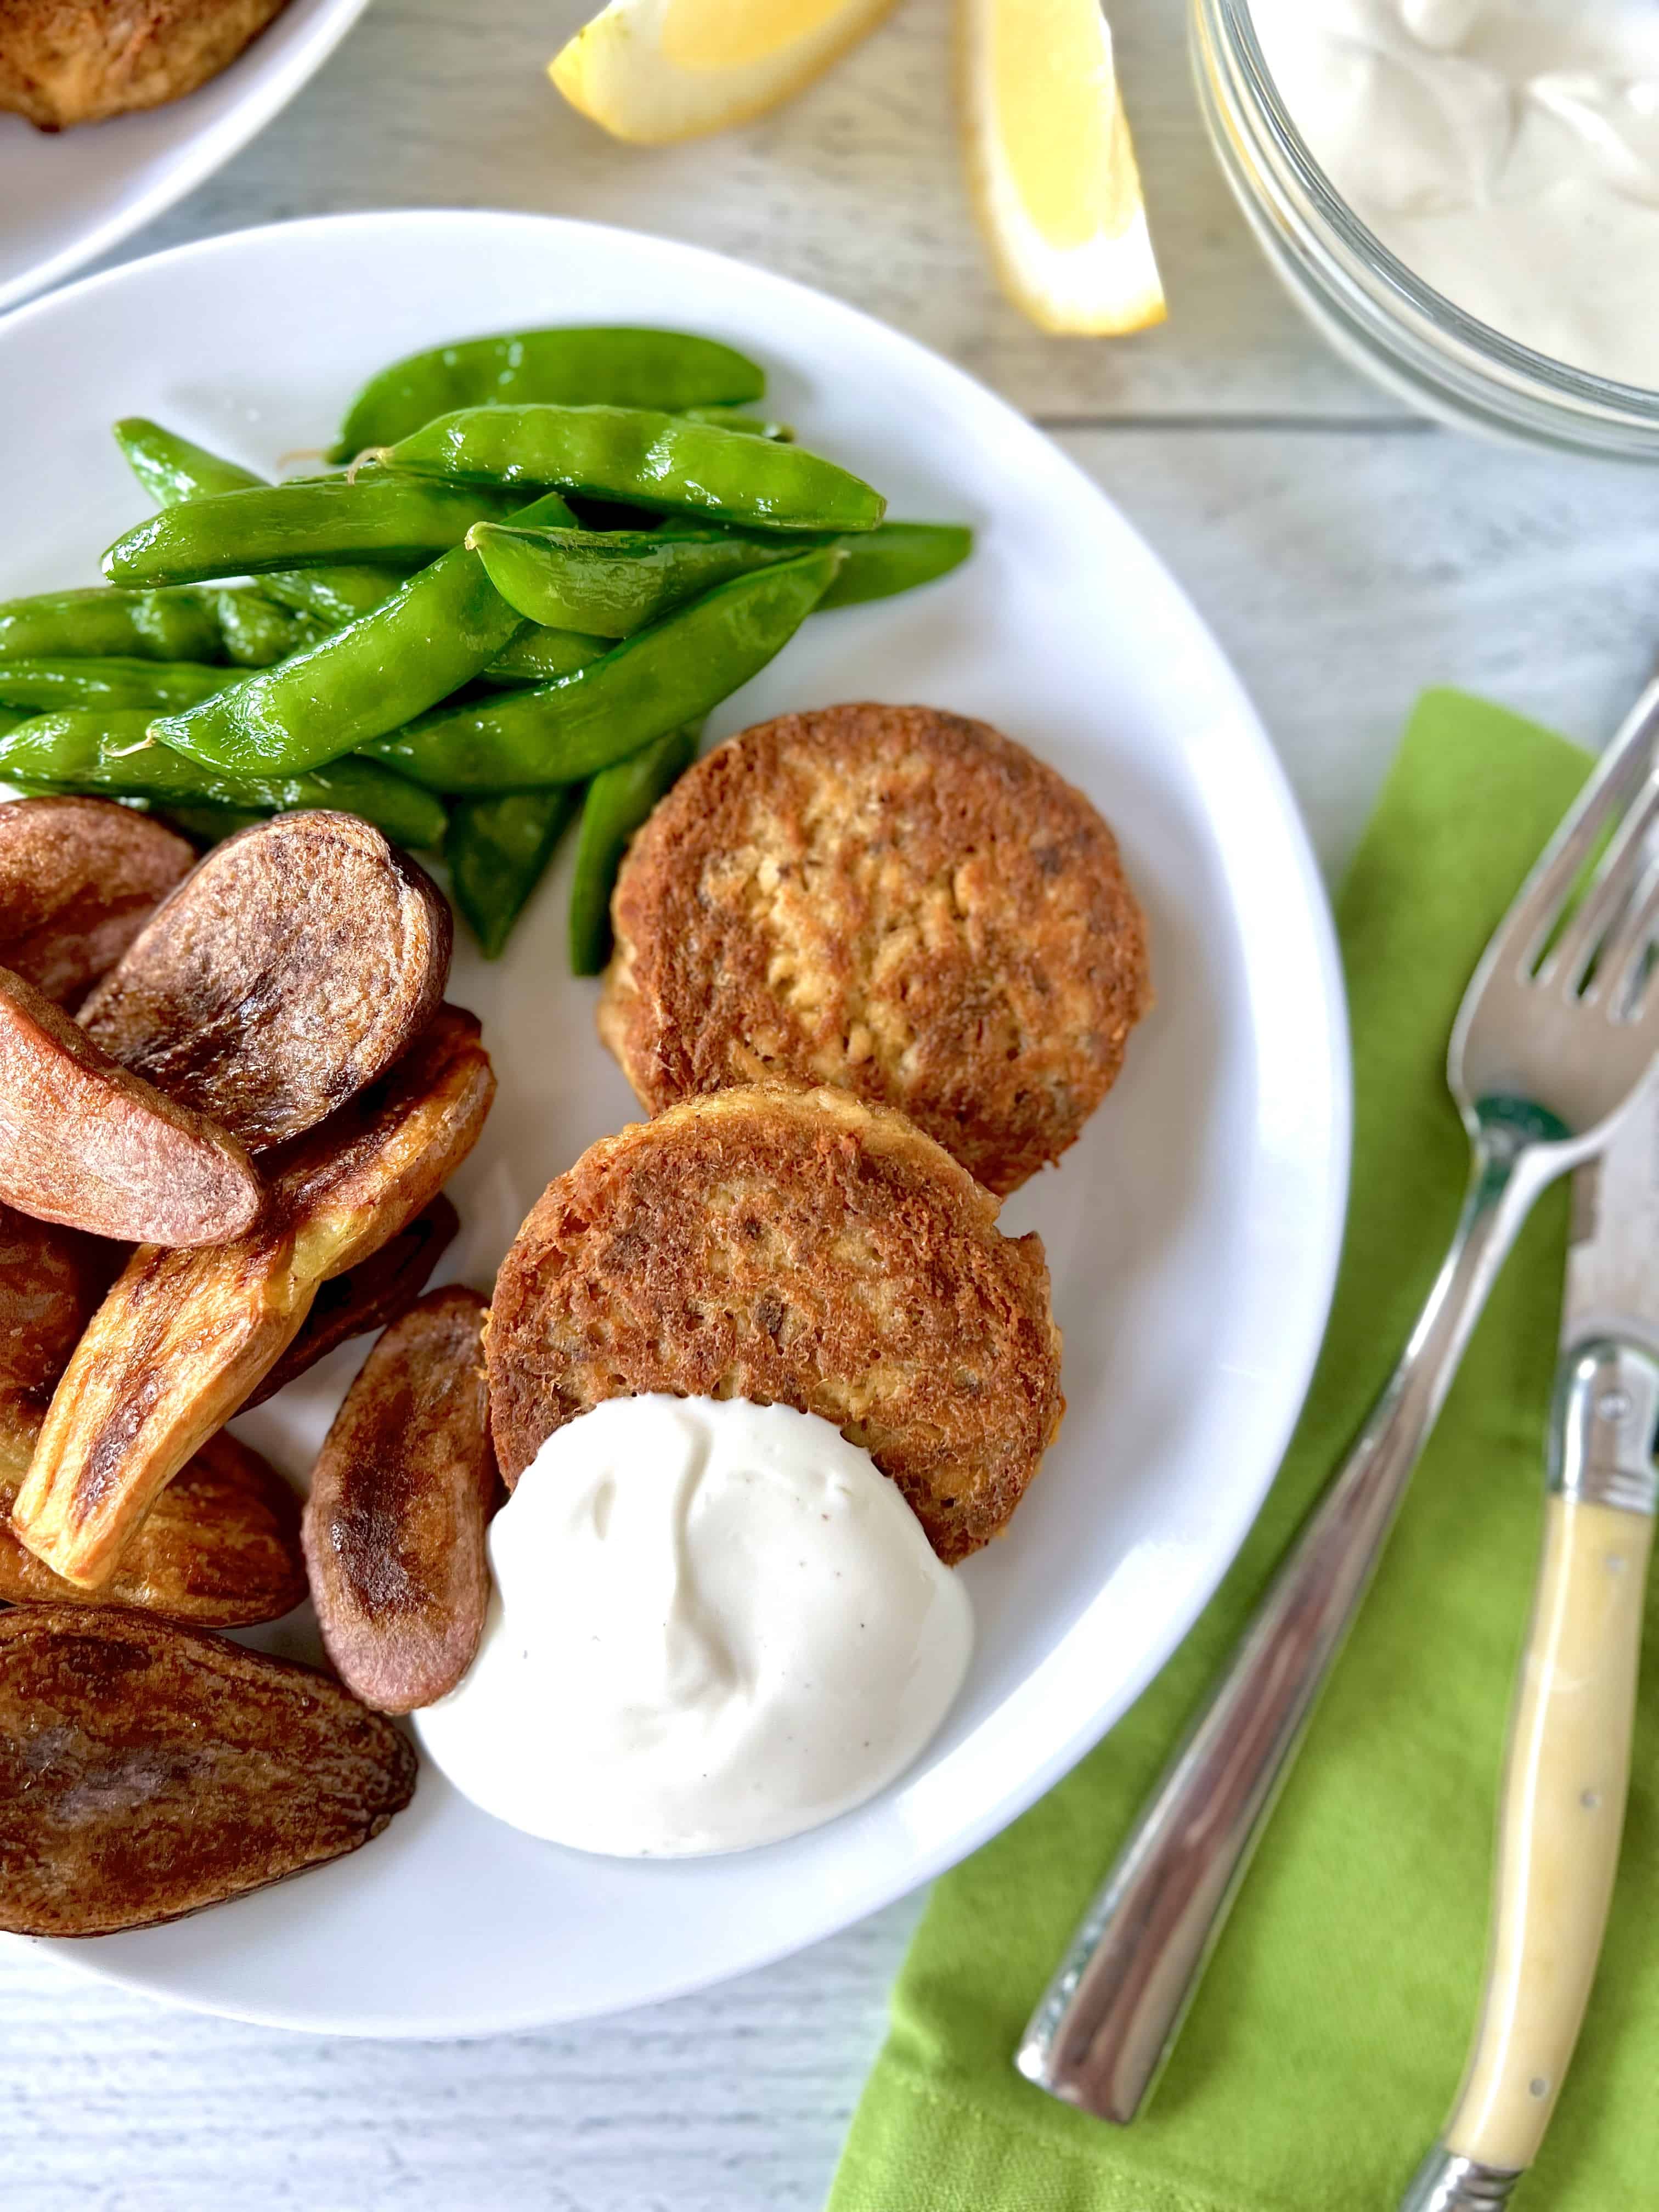 Paleo salmon cakes on a white plate with a dollop of aioli, roasted potatoes and sugar snap peas.